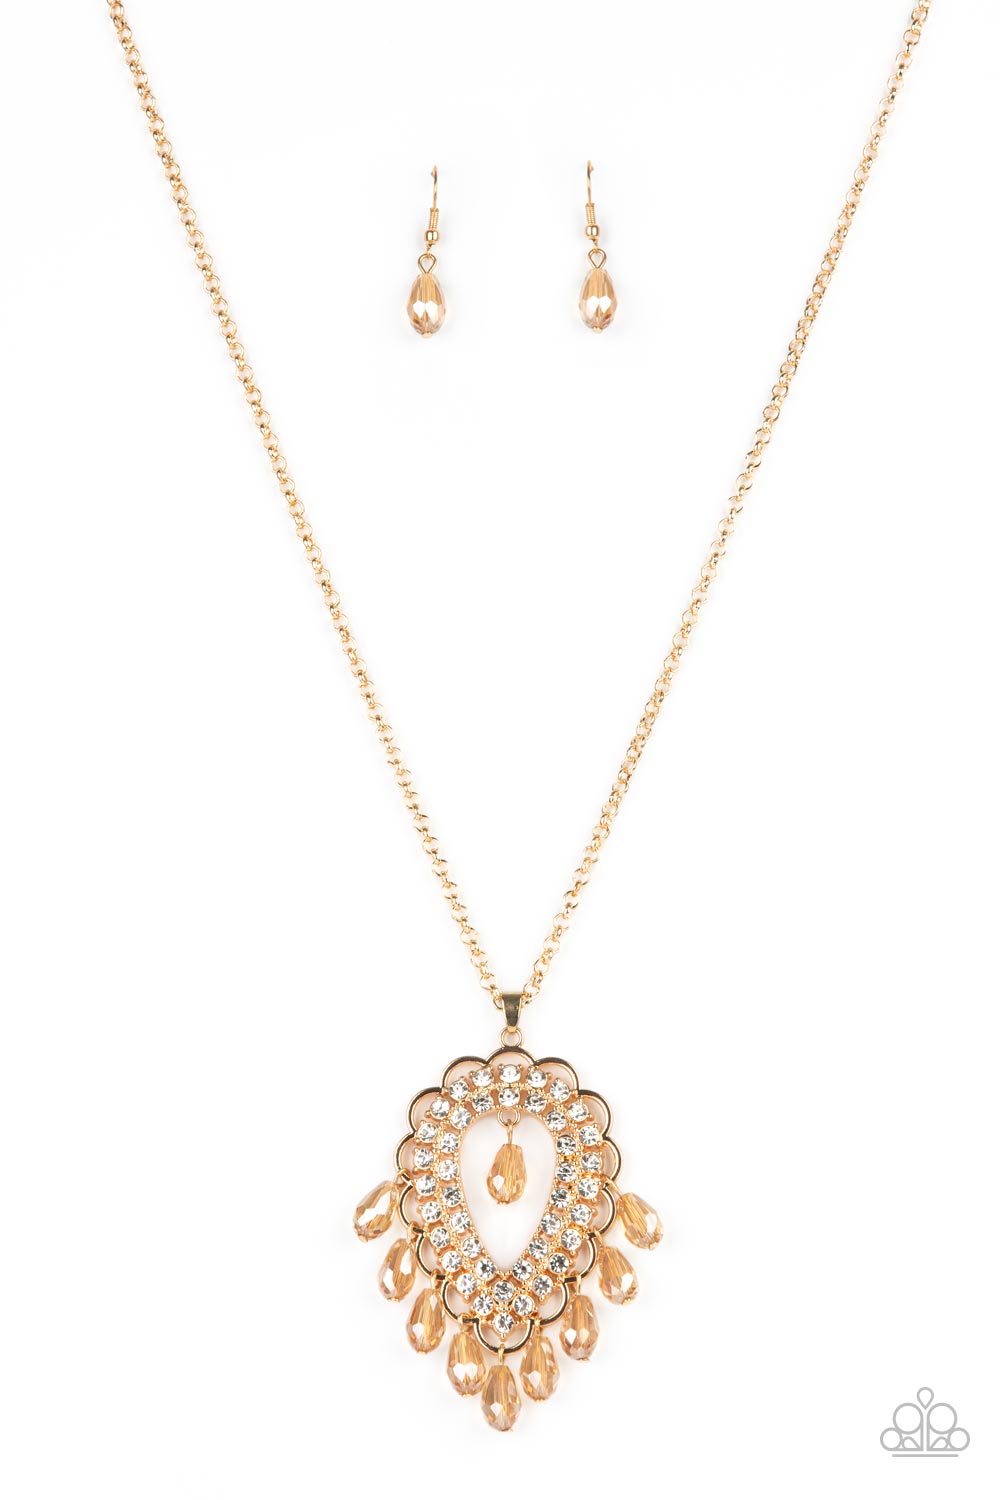 Teasable Teardrops - Gold necklace 2193